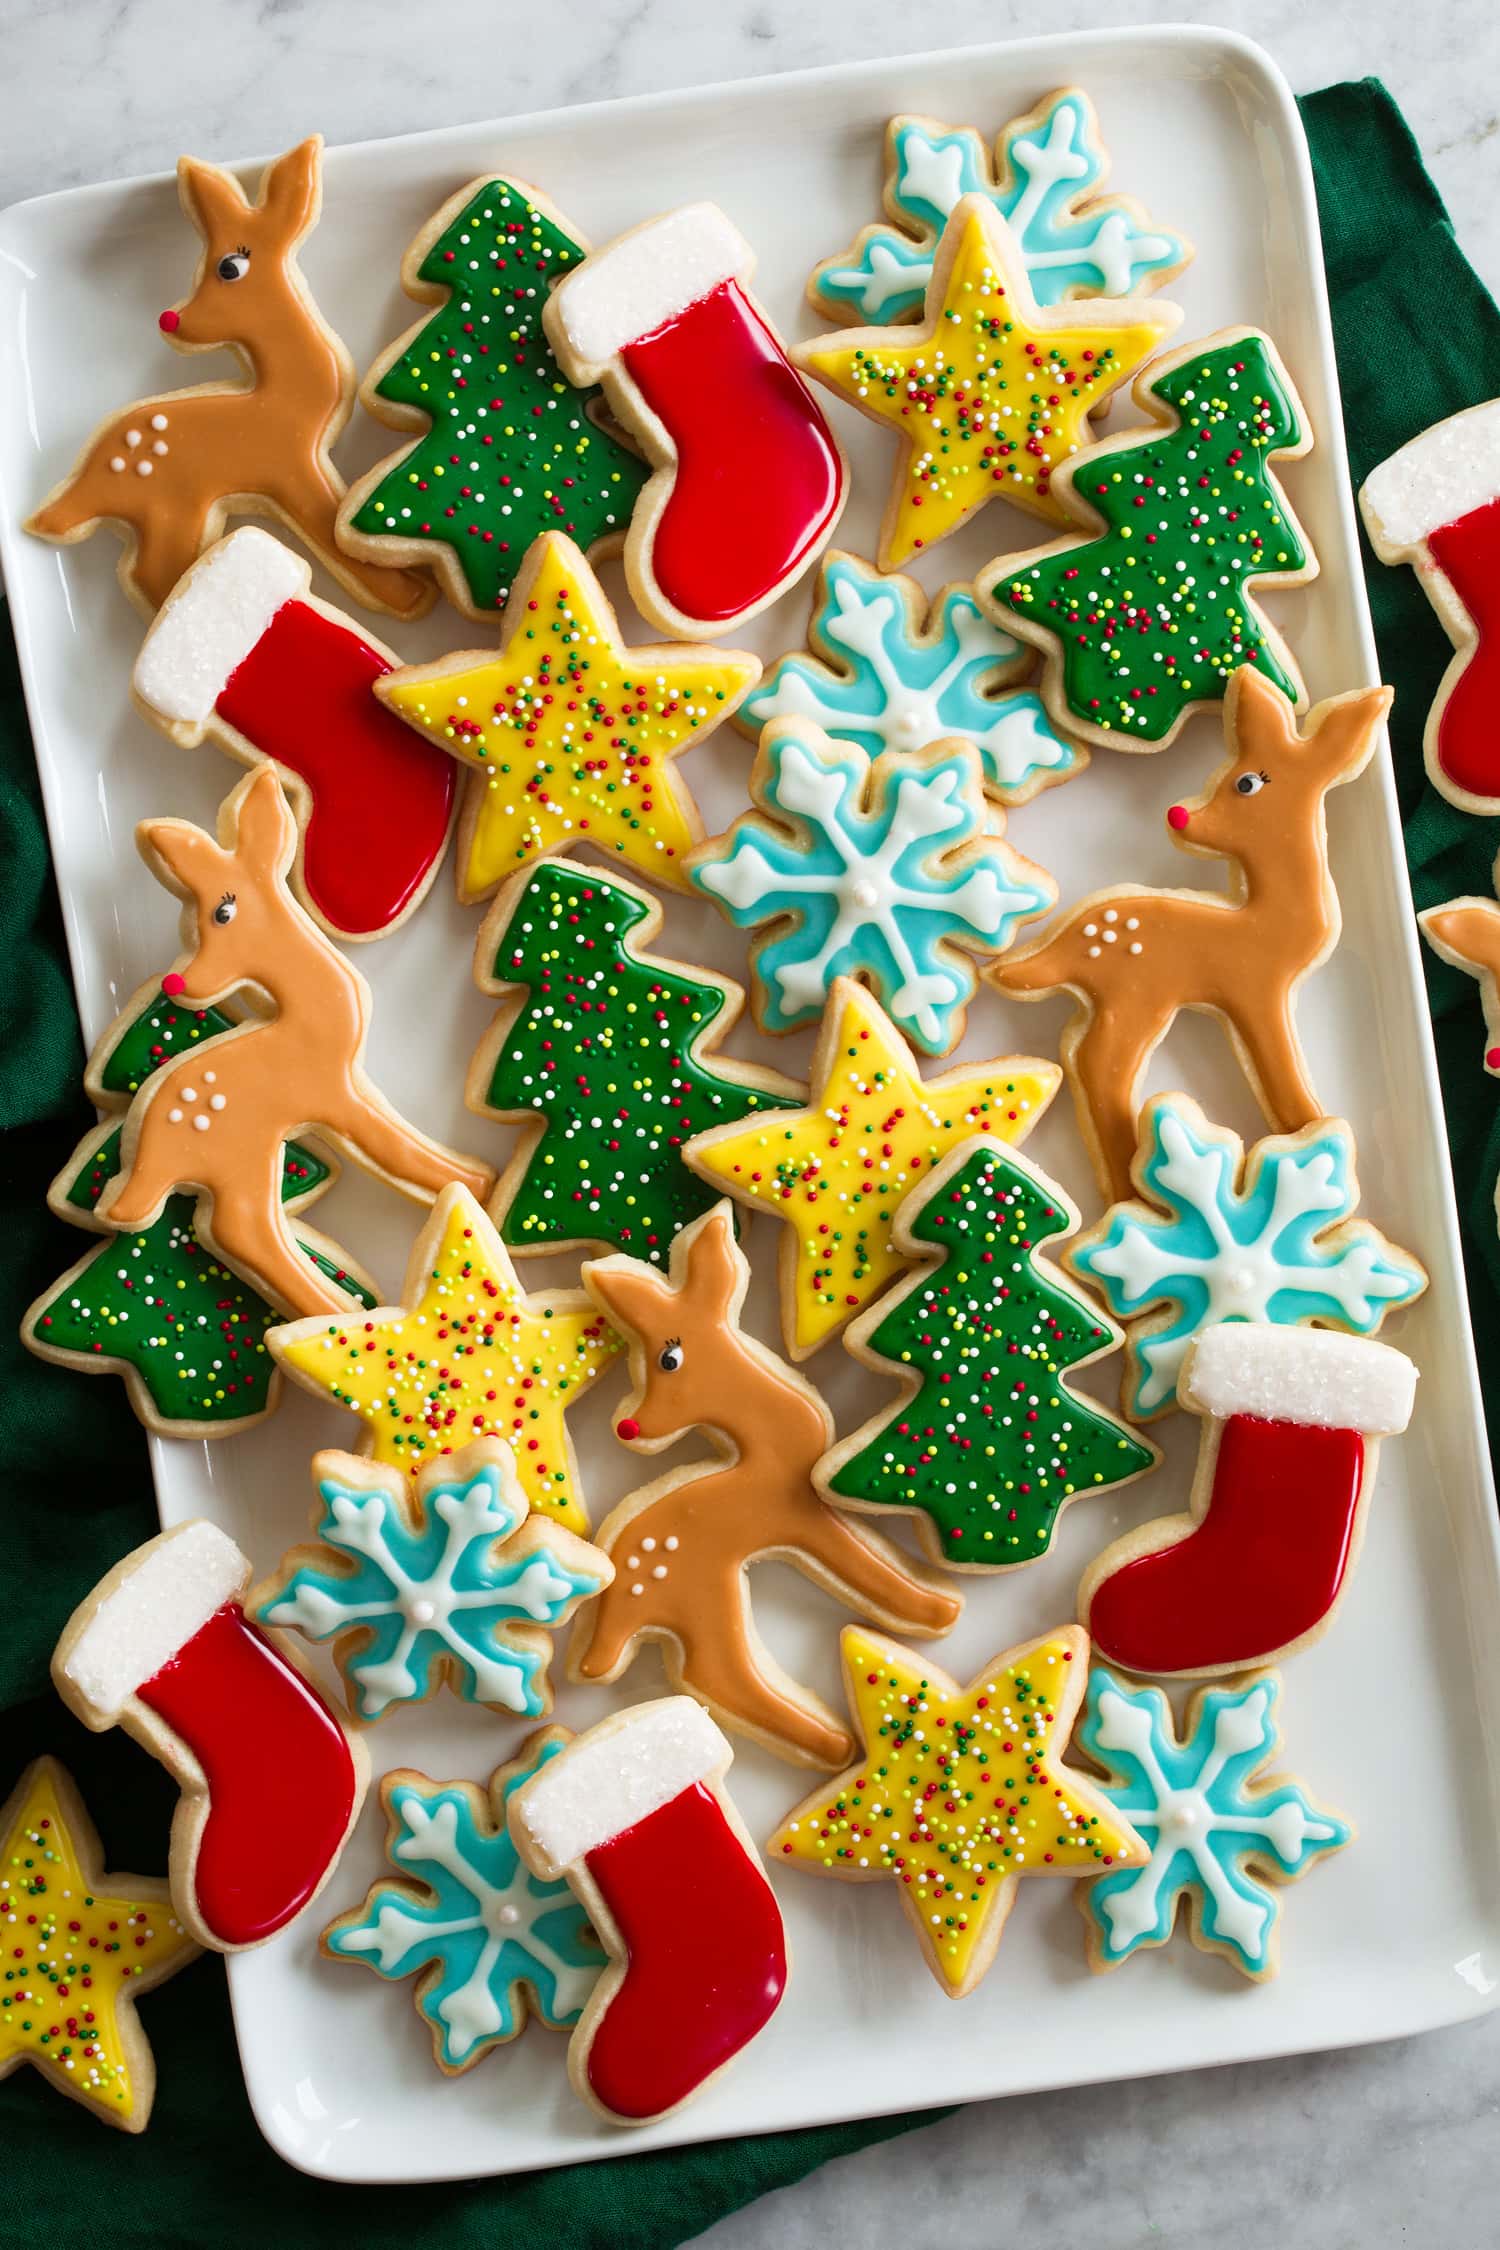 Cut out Christmas sugar cookies decorated with easy icing. Shown on a white rectangular platter from overhead. There are dear shapes, trees, stars, snowflakes and stockings.